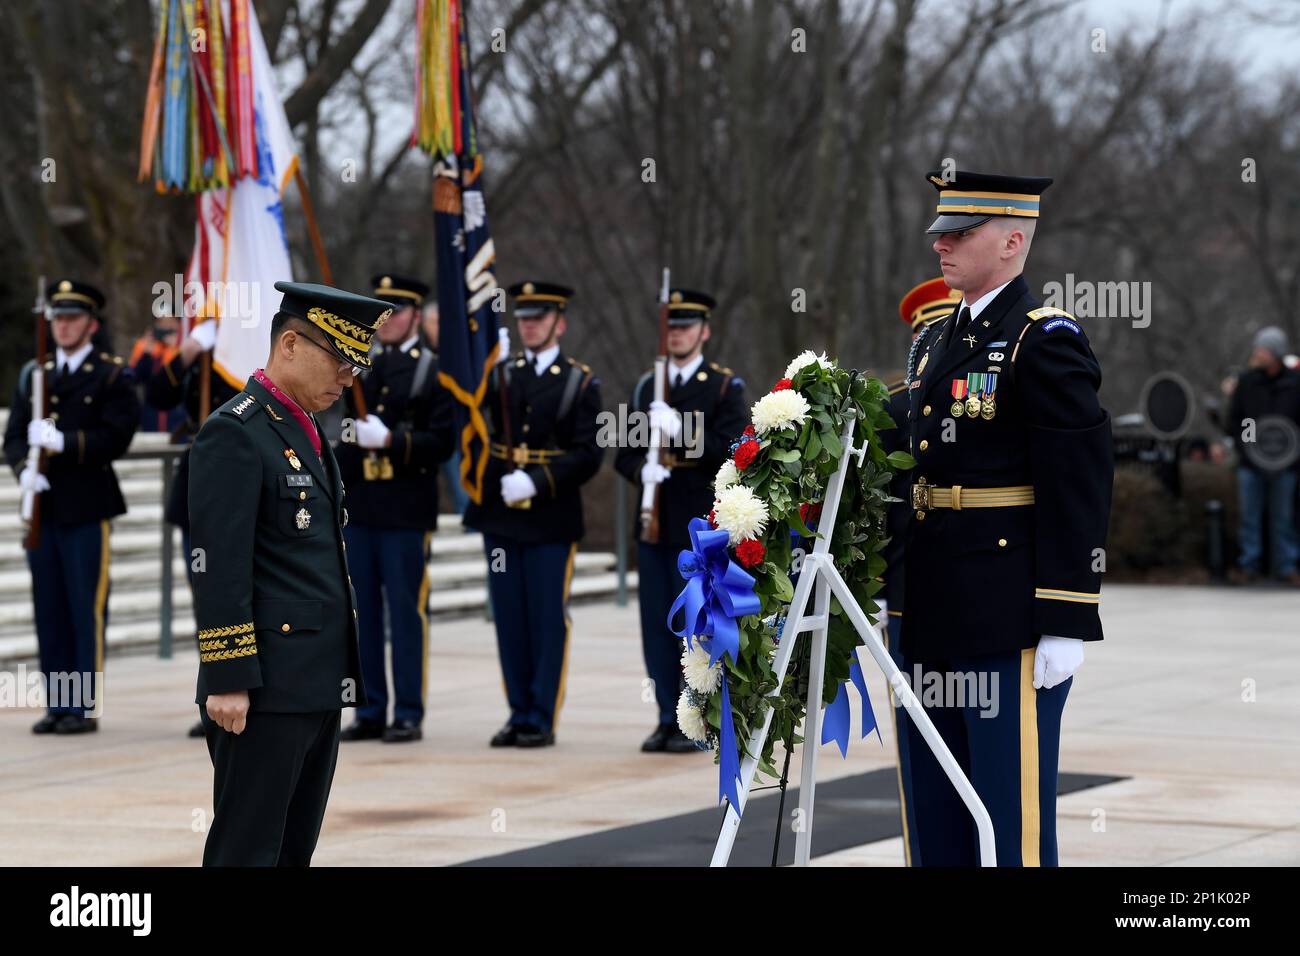 General Park Jeong Hwan, Chief of Staff of the Republic of Korea Army lays a wreath at the Tomb of the Unknown Soldier at Arlington National Cemetery in Arlington, Va, Jan 25, 2023. U.S. Army Maj. Gen. Allan M. Pepin, commanding general, Joint Task Force- National Capital Region and U.S. Army Military District of Washington, hosted this Army Full Honor Wreath-Laying Ceremony. Stock Photo